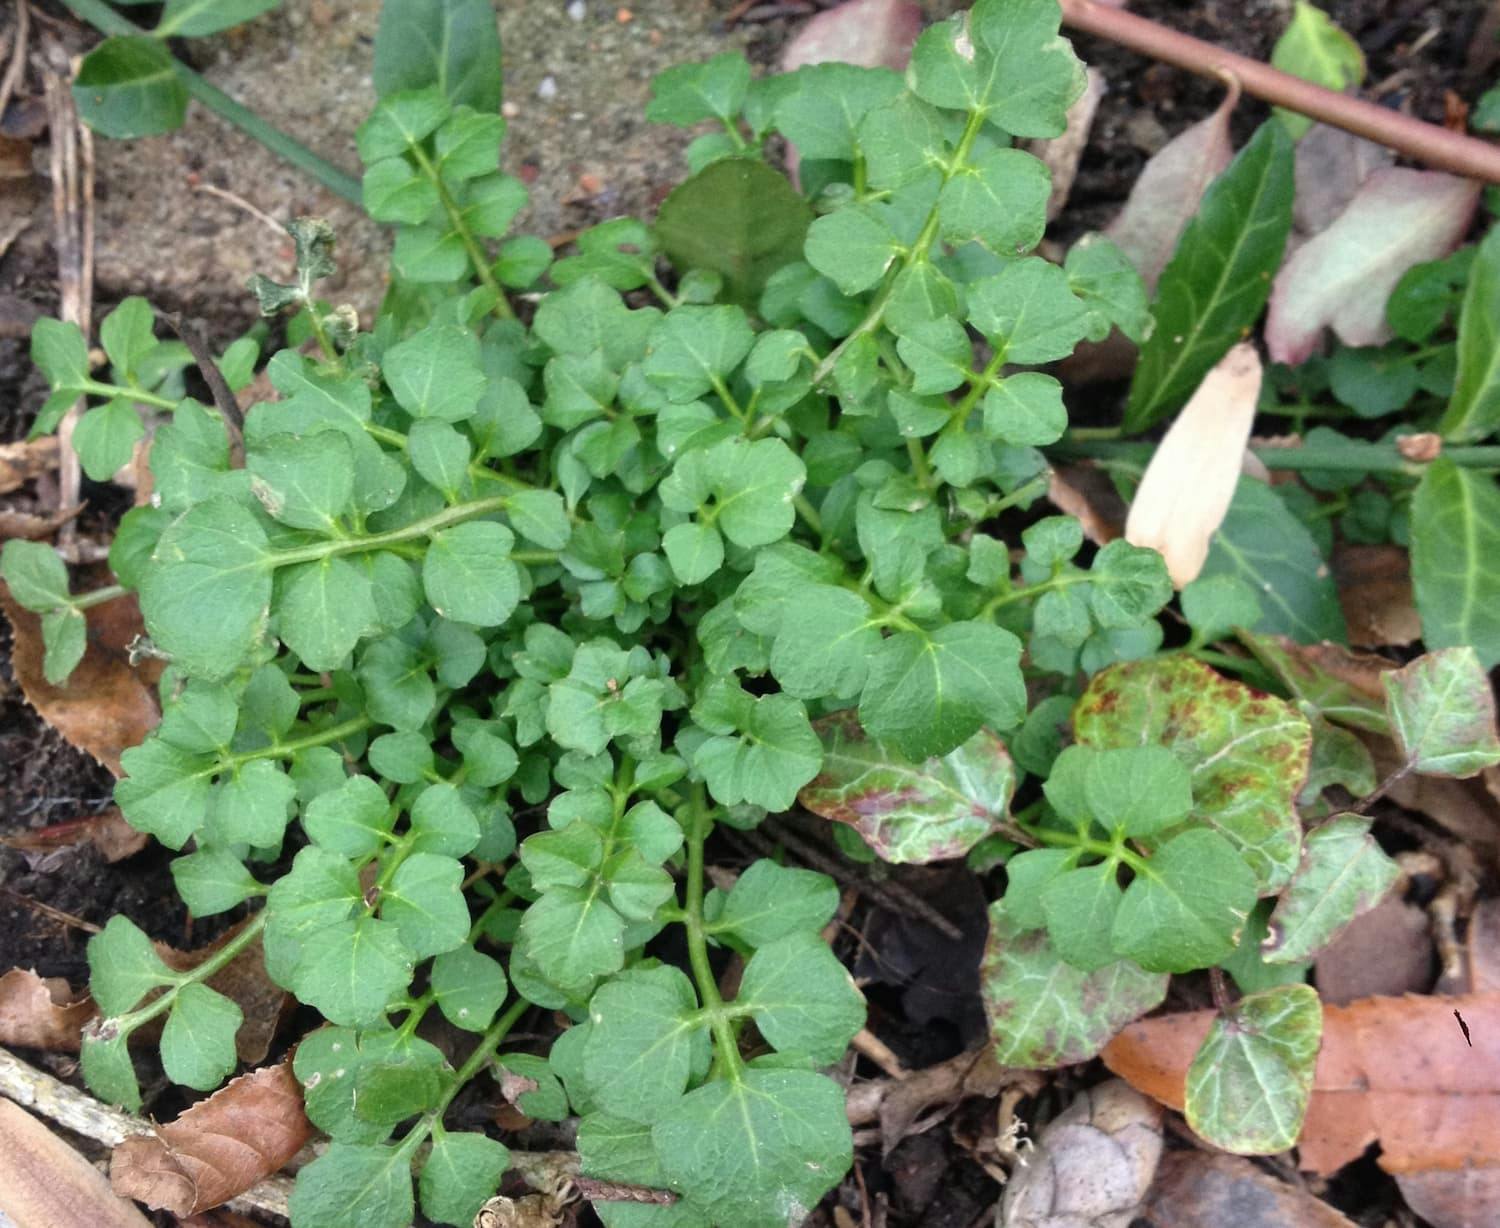 How to Identify Hairy Bittercress — Foraging for Common Edible Weeds